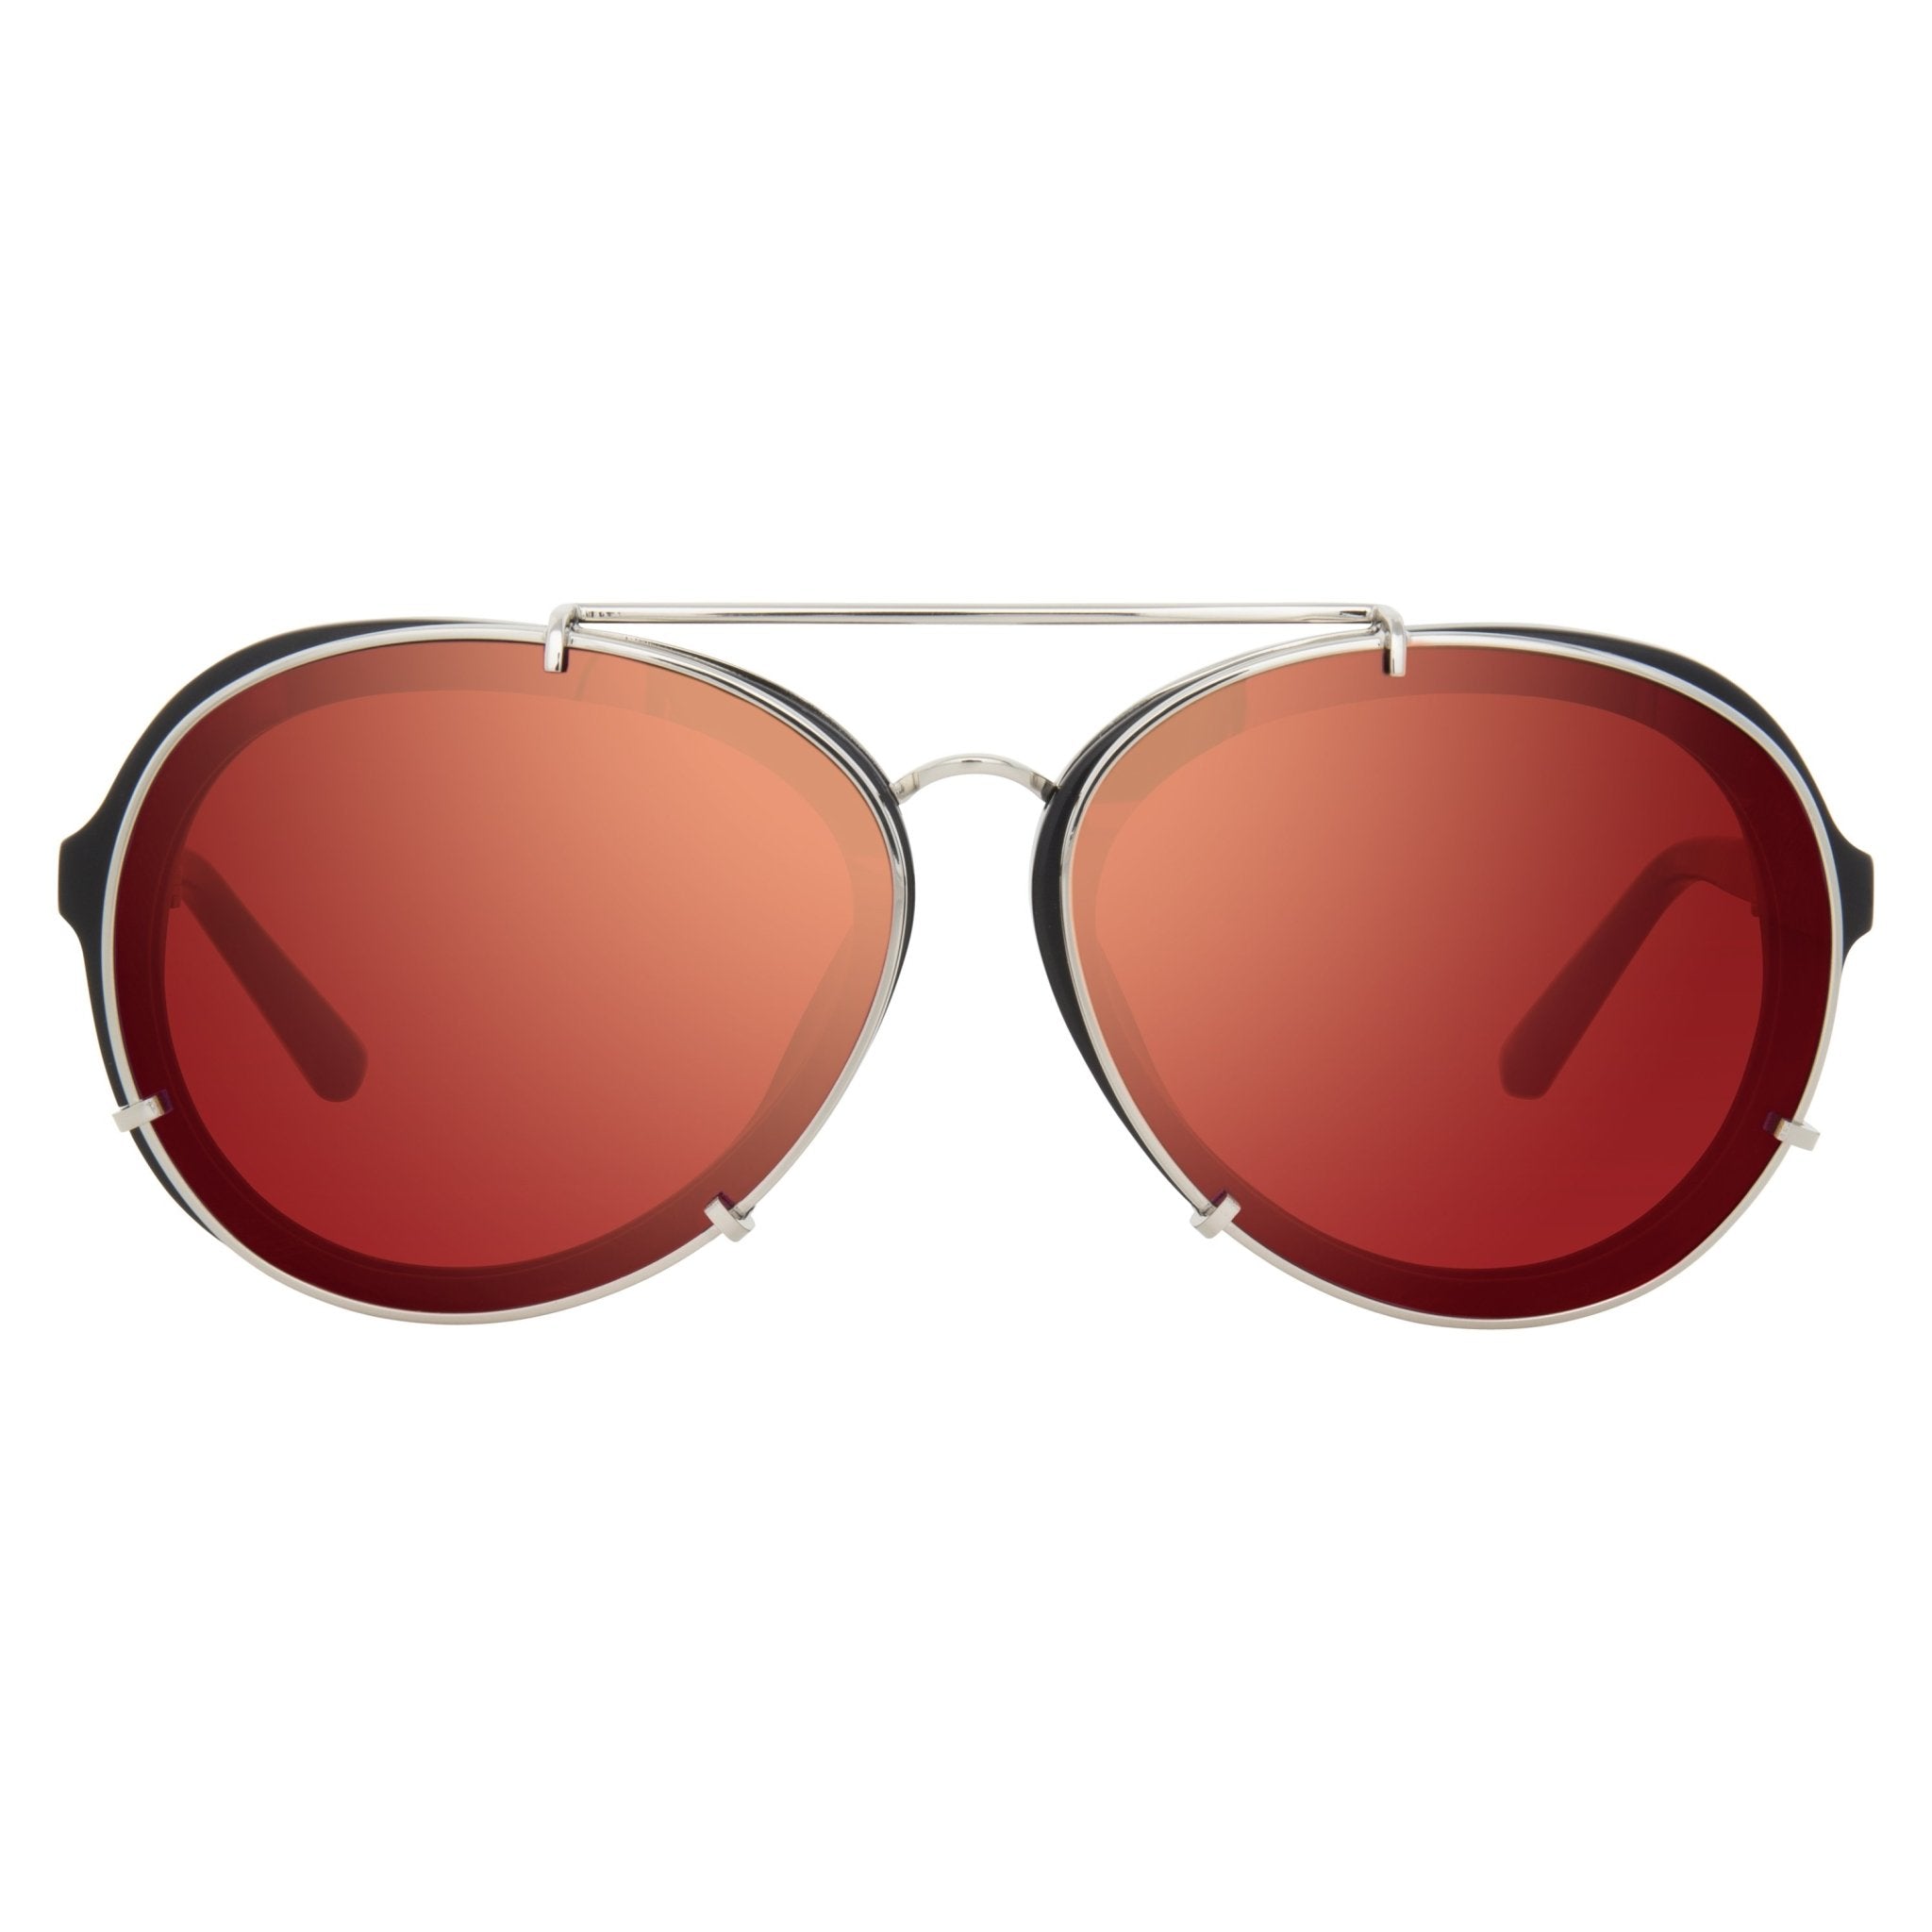 Phillip Lim Sunglasses Brushed Black and Nickel Aviator with Red Mirror Lenses Category 2 - PL170C6SUN - Watches & Crystals